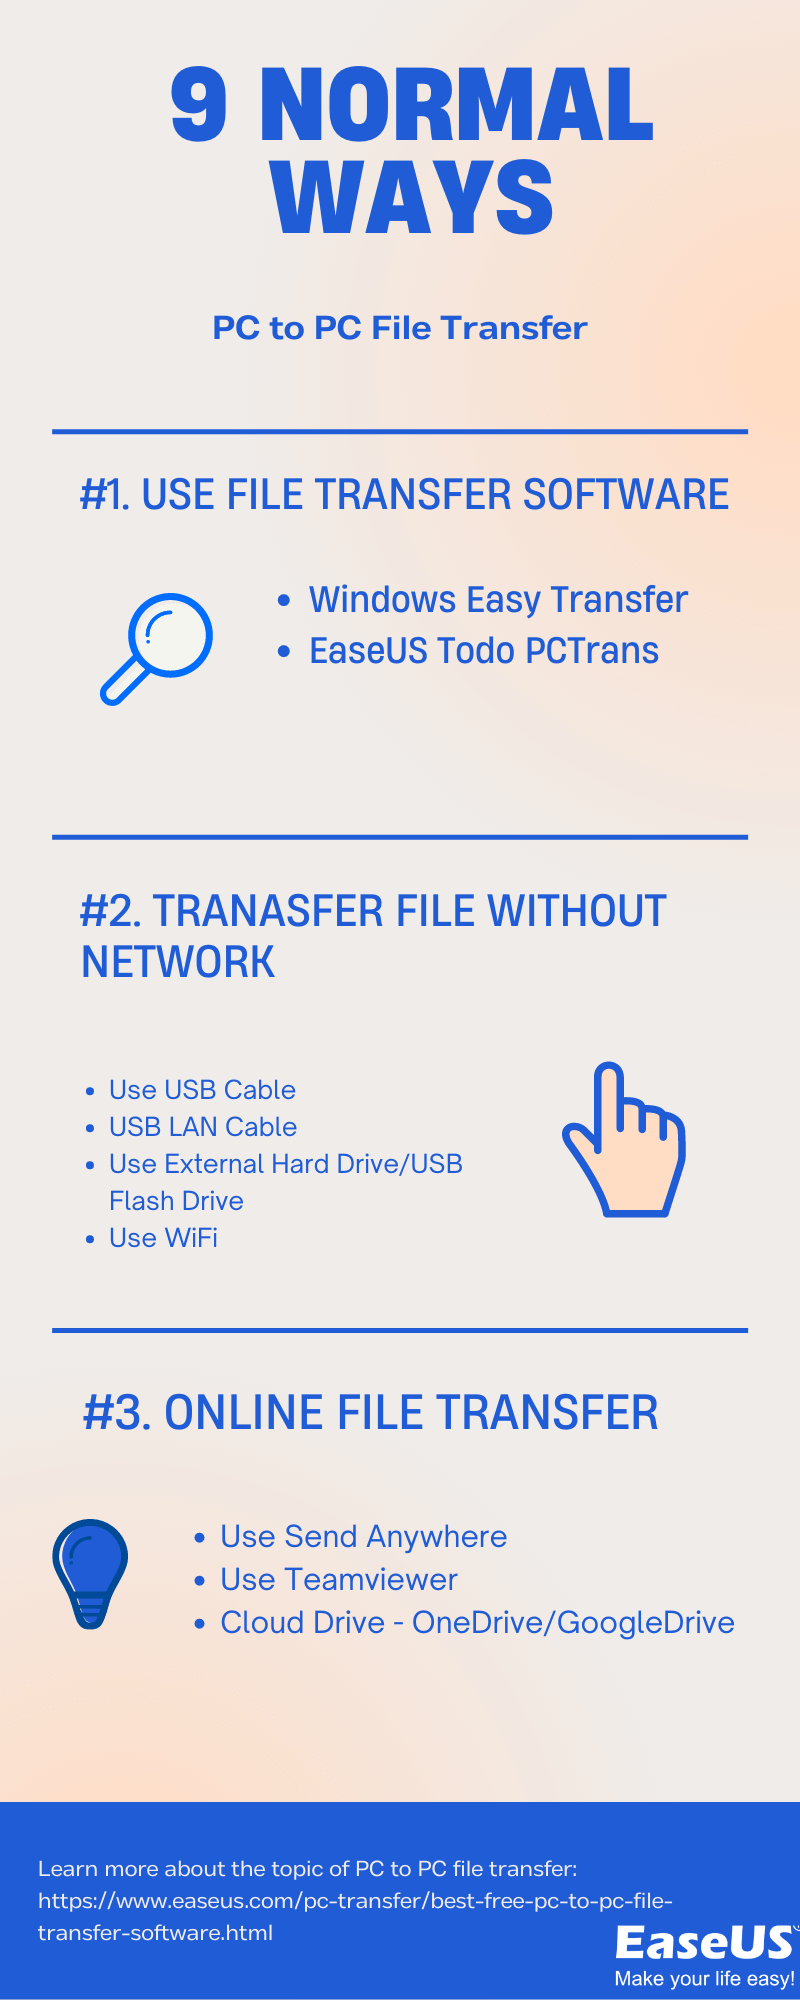 9 ways for PC to PC file transfer